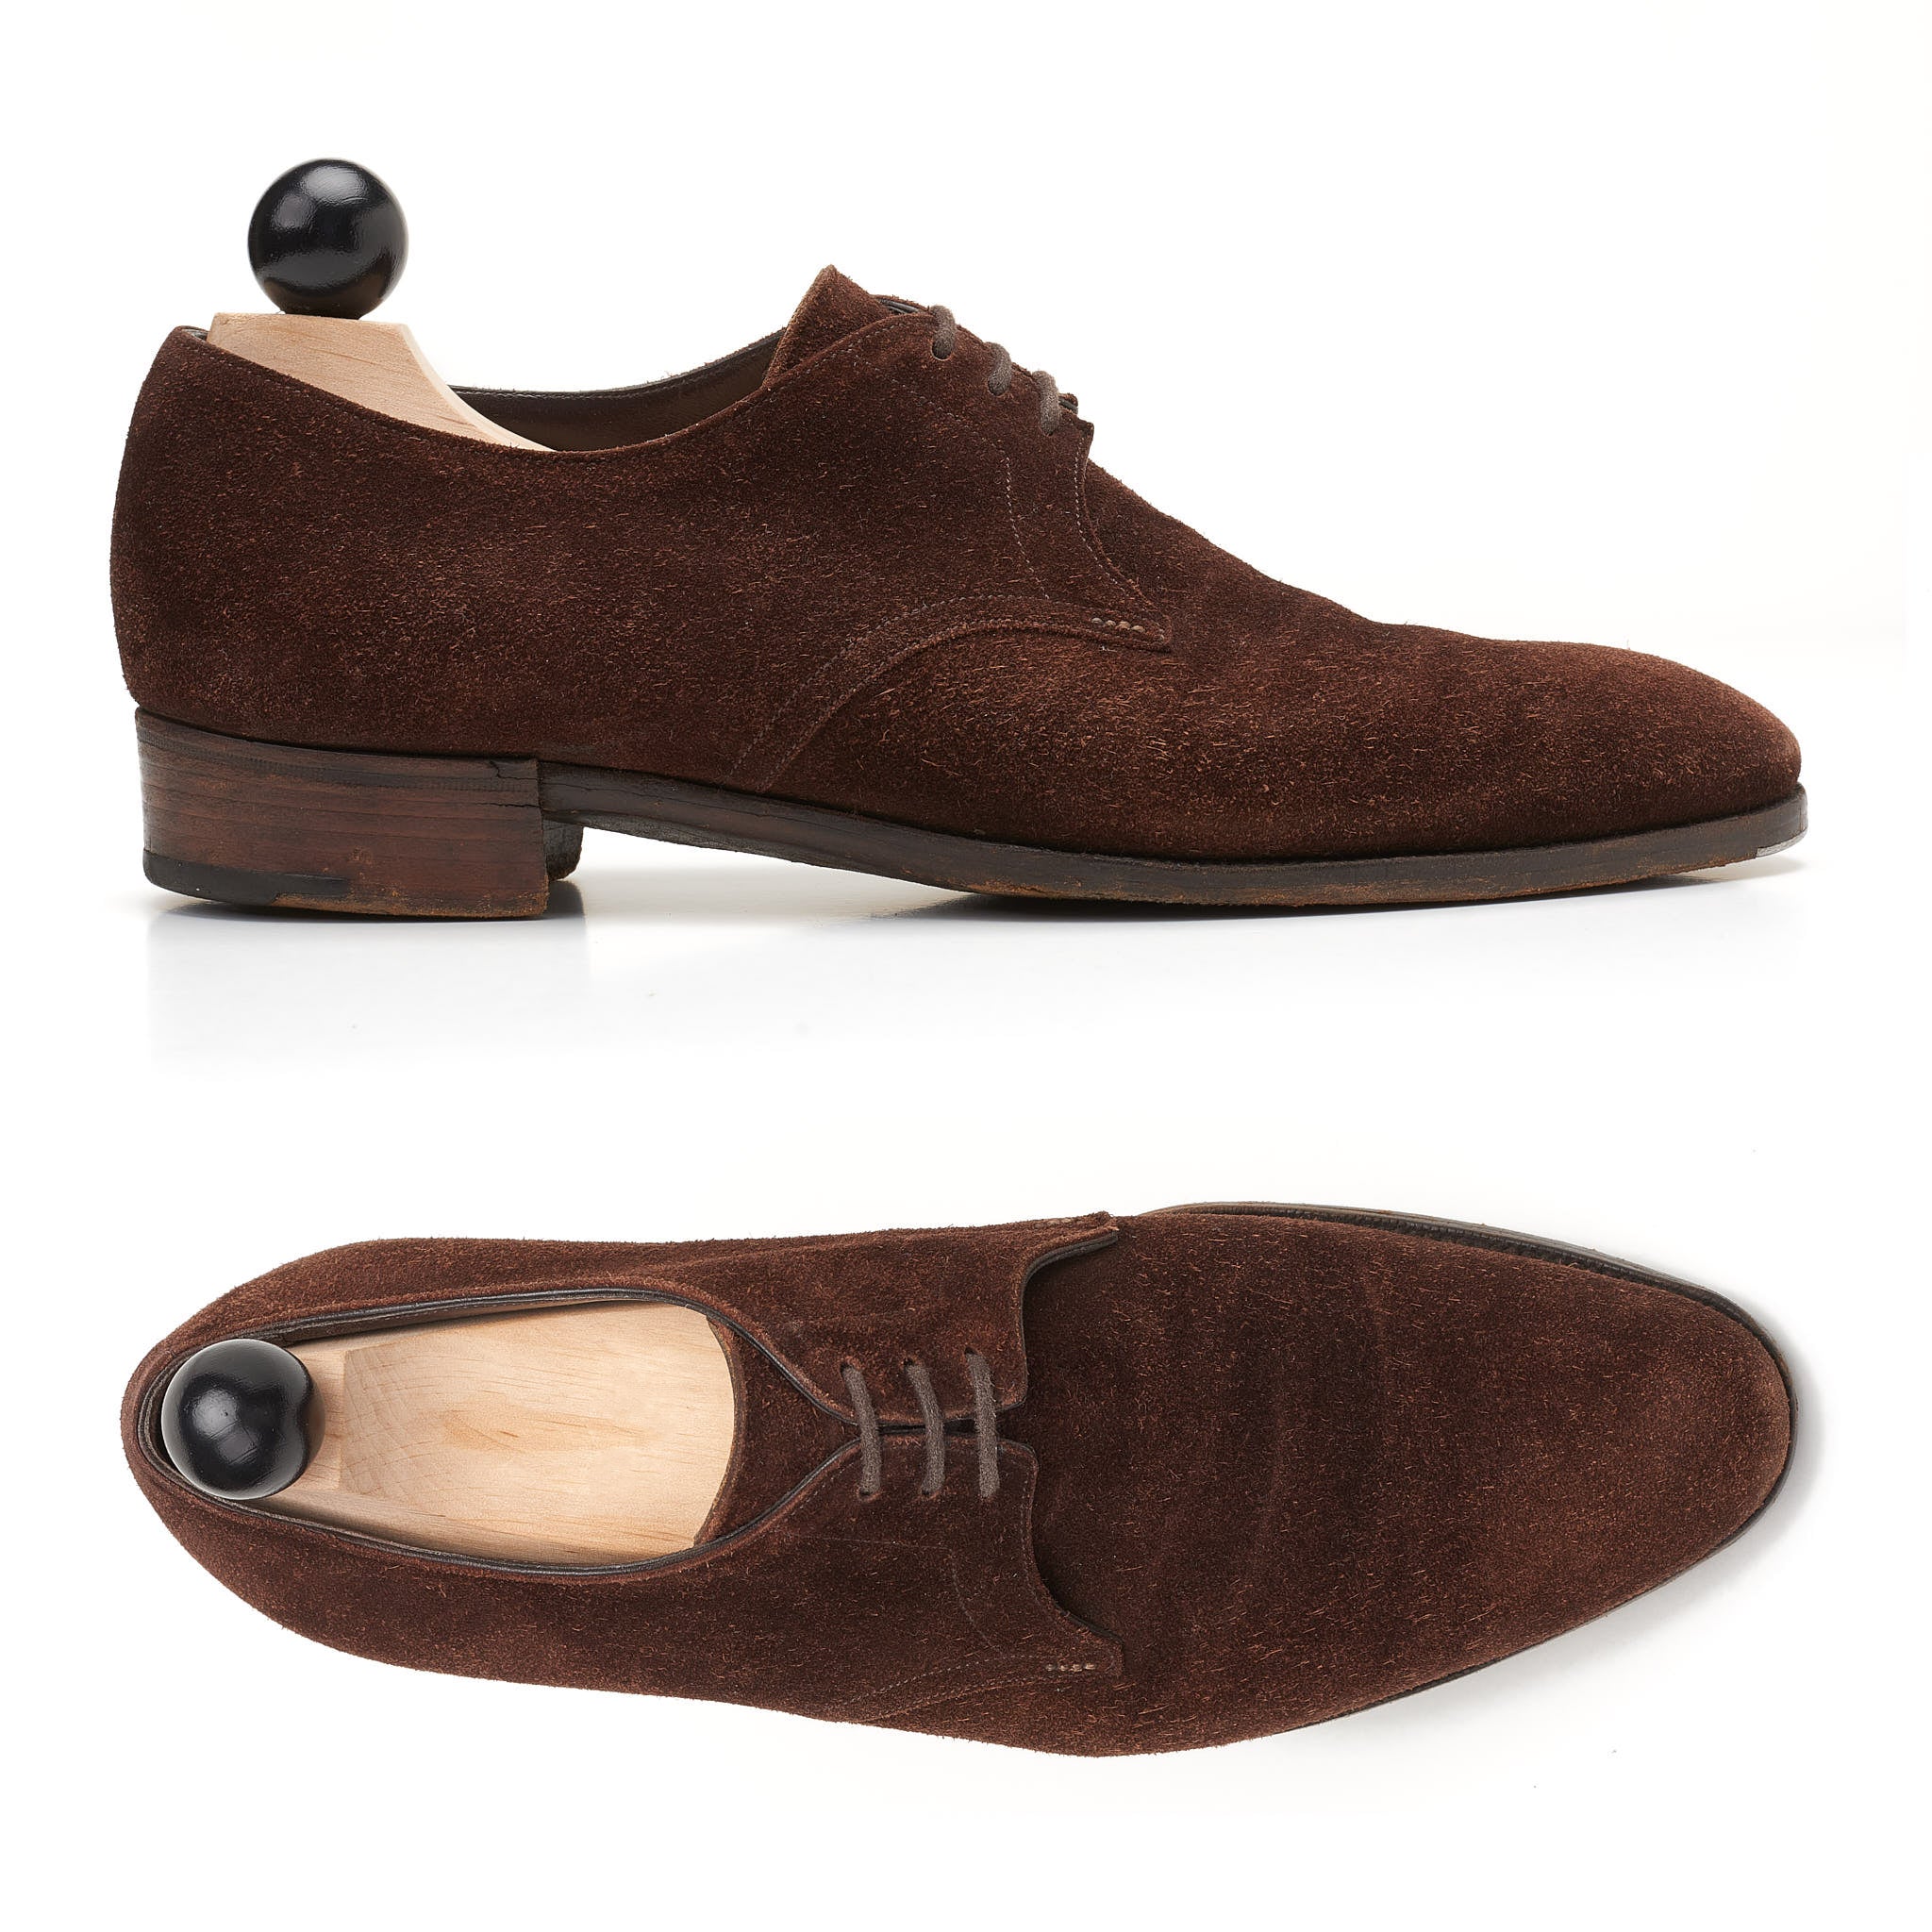 GAZIANO & GIRLING "Derwent" Brown Suede Derby Shoes UK 7E US 7.5 Last DG70 GAZIANO & GIRLING